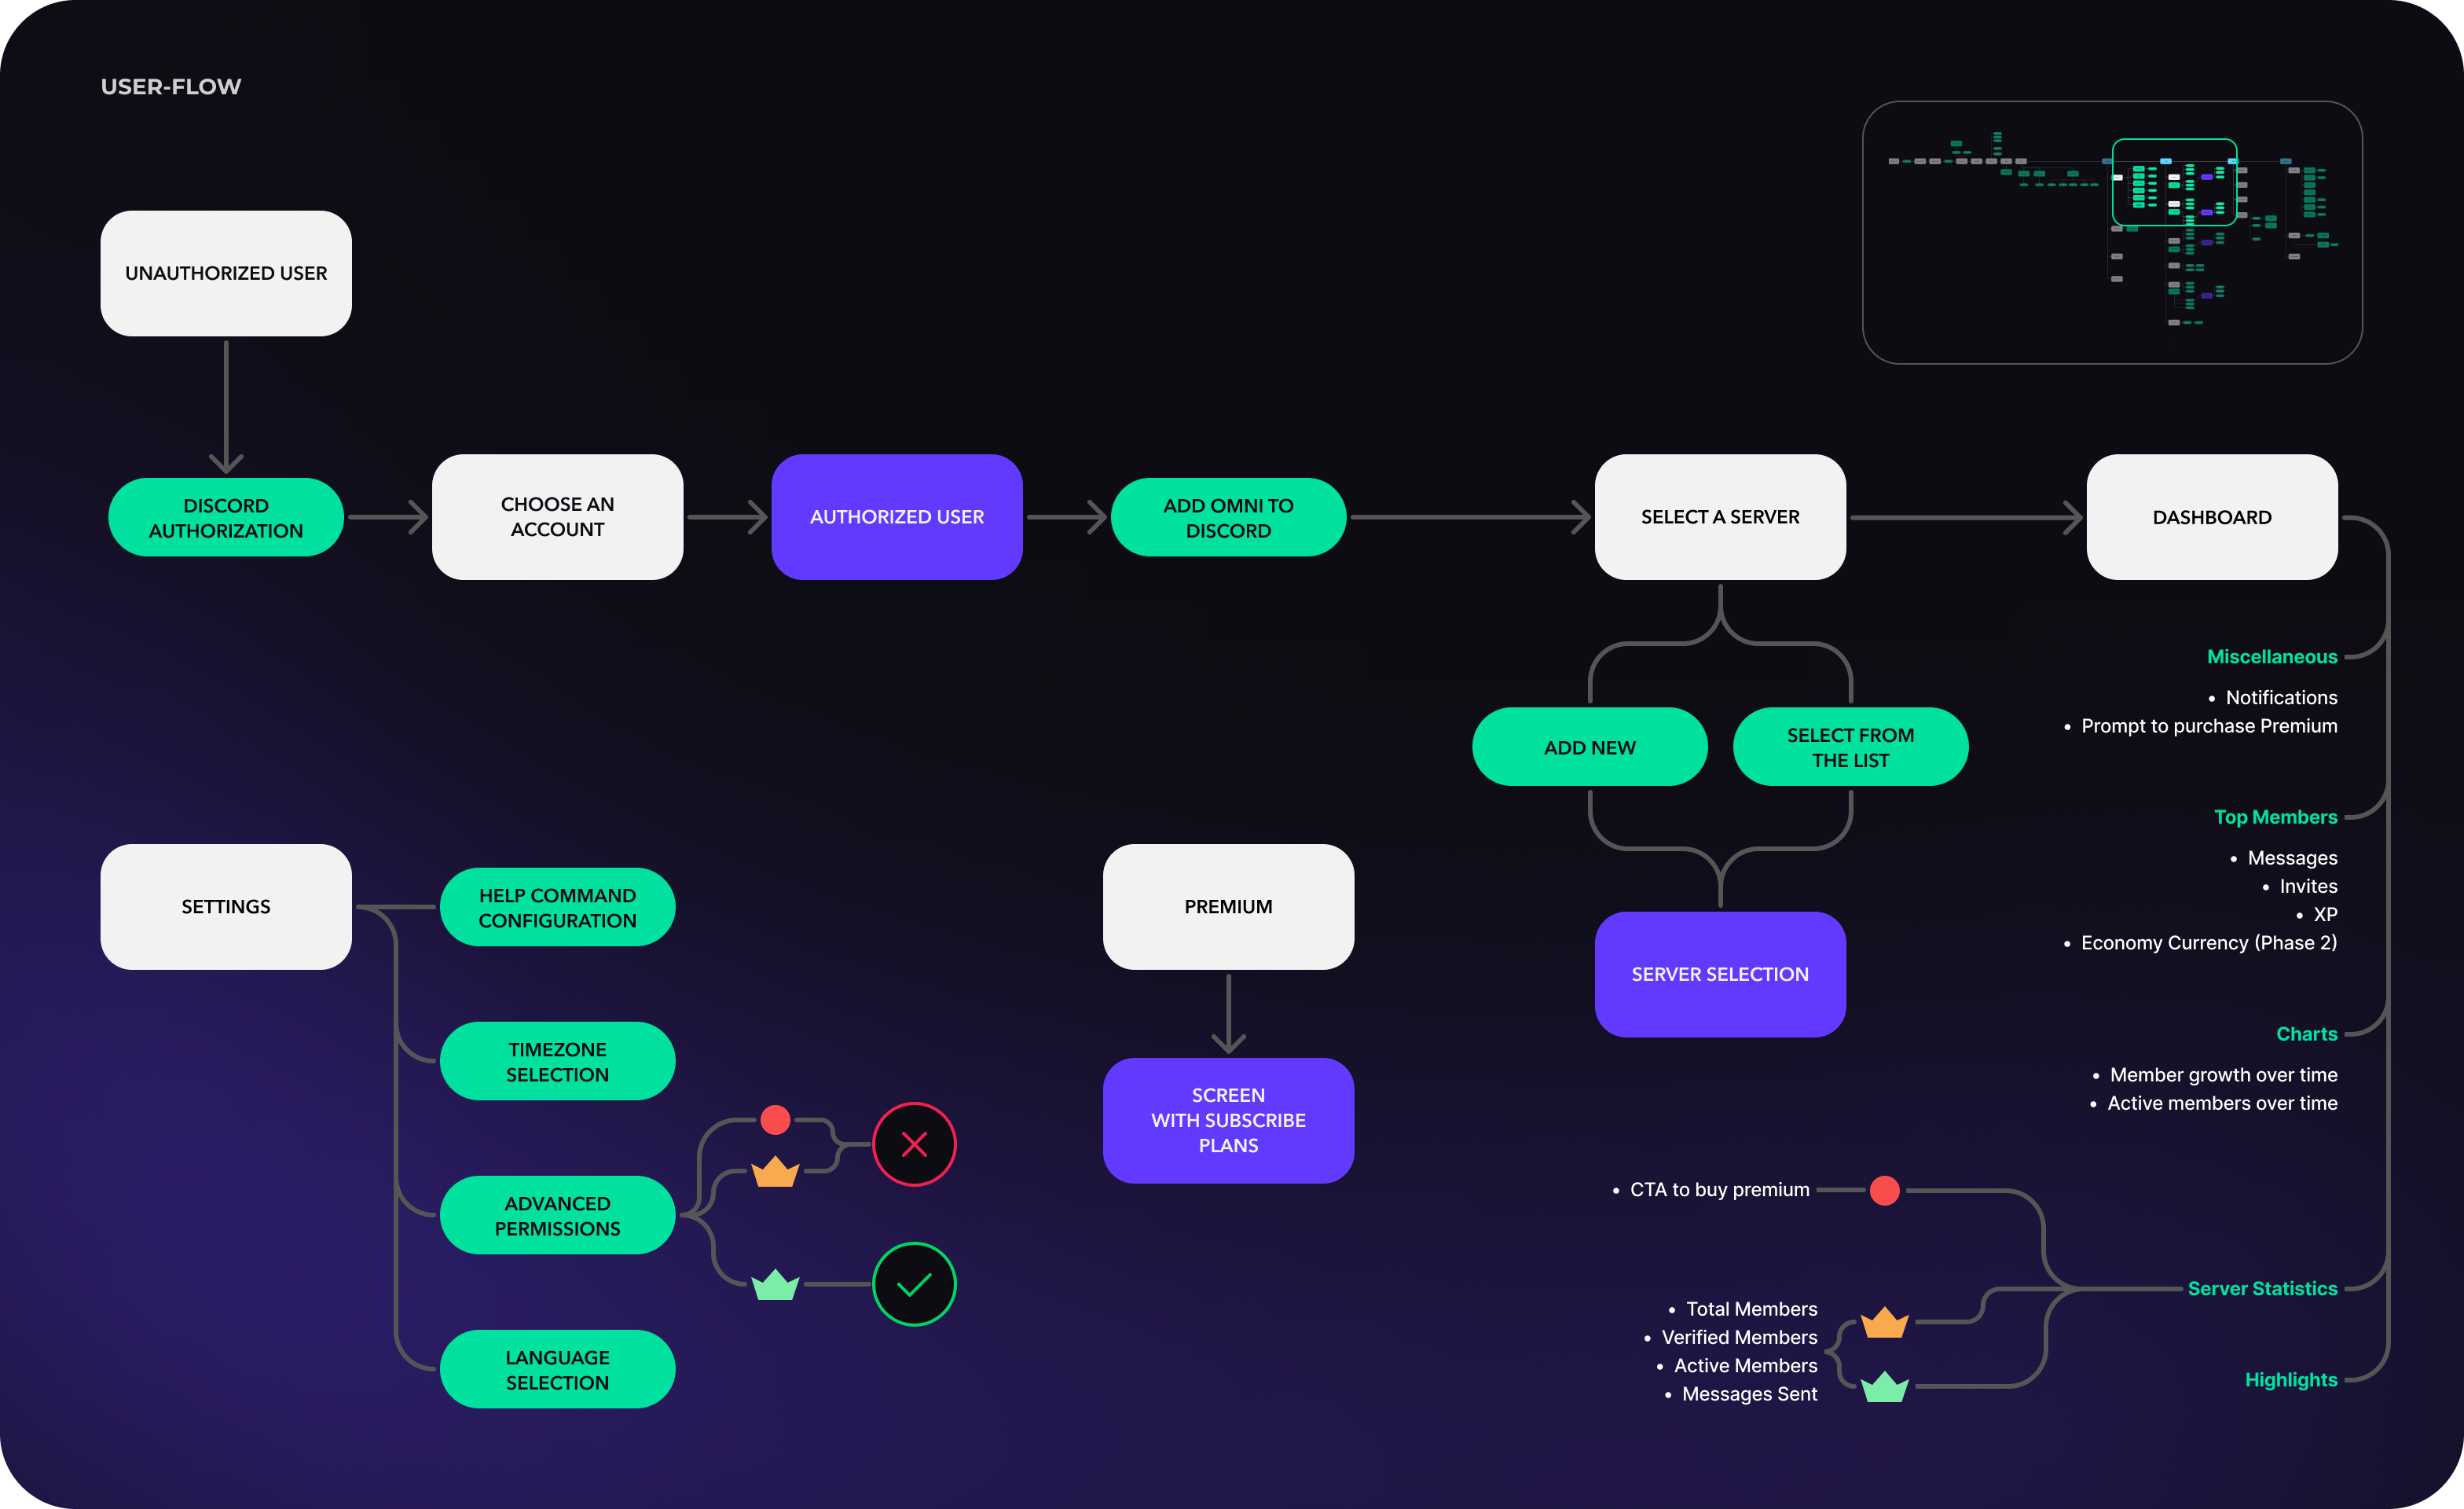 5. Goodface agency - case Omni - User flow.png - UX/UI design and development for SaaS solution for Discord app - goodface.agency